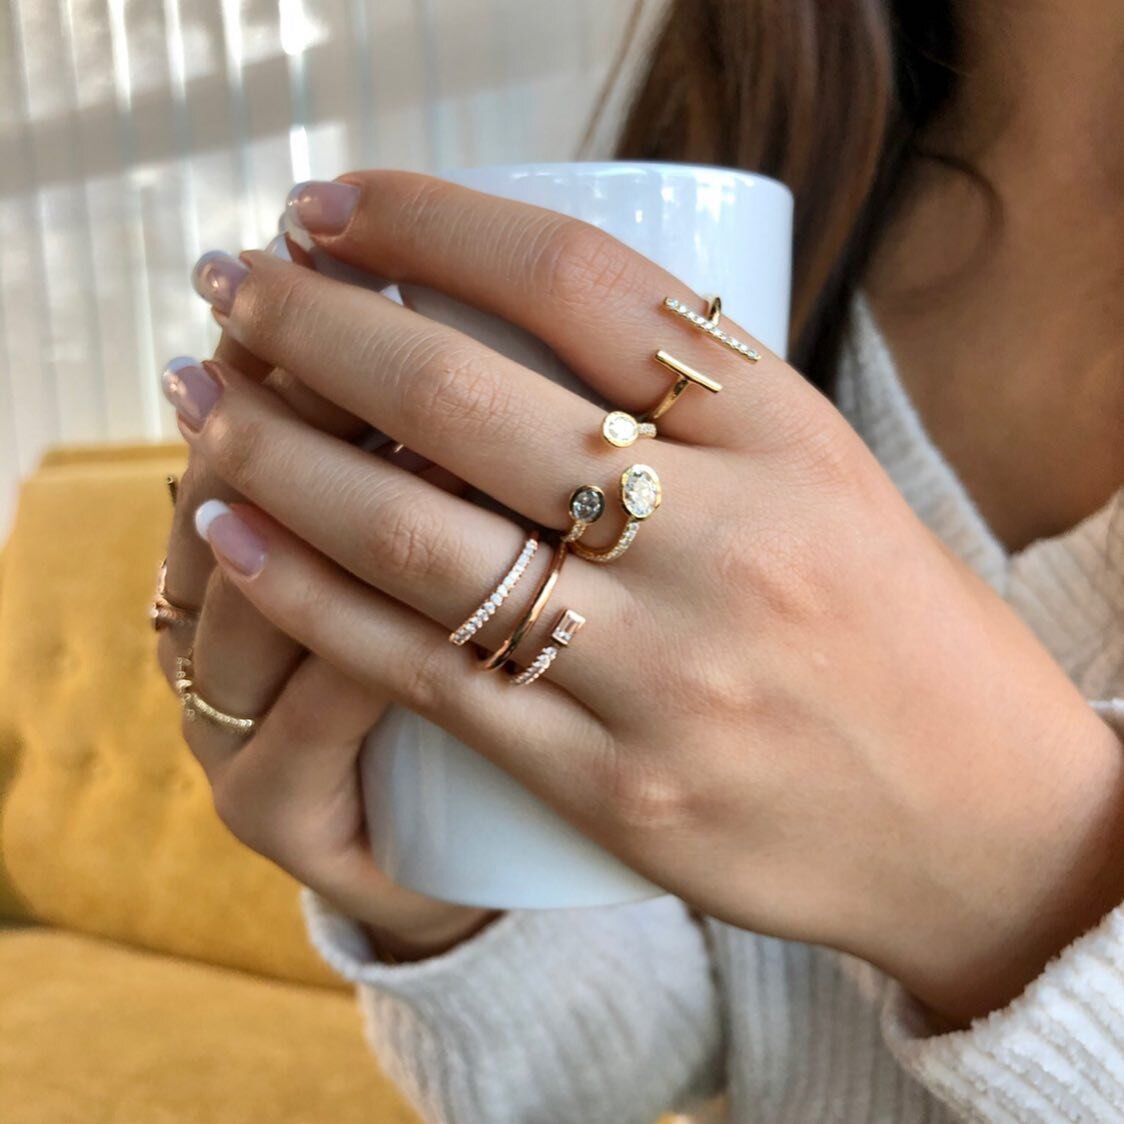 Today was summarized with lots of hot drinks + the perfect accessory✨
&bull;
&bull;
#yellowgold #righthandring #ring #goldring #multipleringstrend #fashionjewelry #chicjewelry #finejewelry #diamond #rings 
#madeinUSA #madeincalifornia